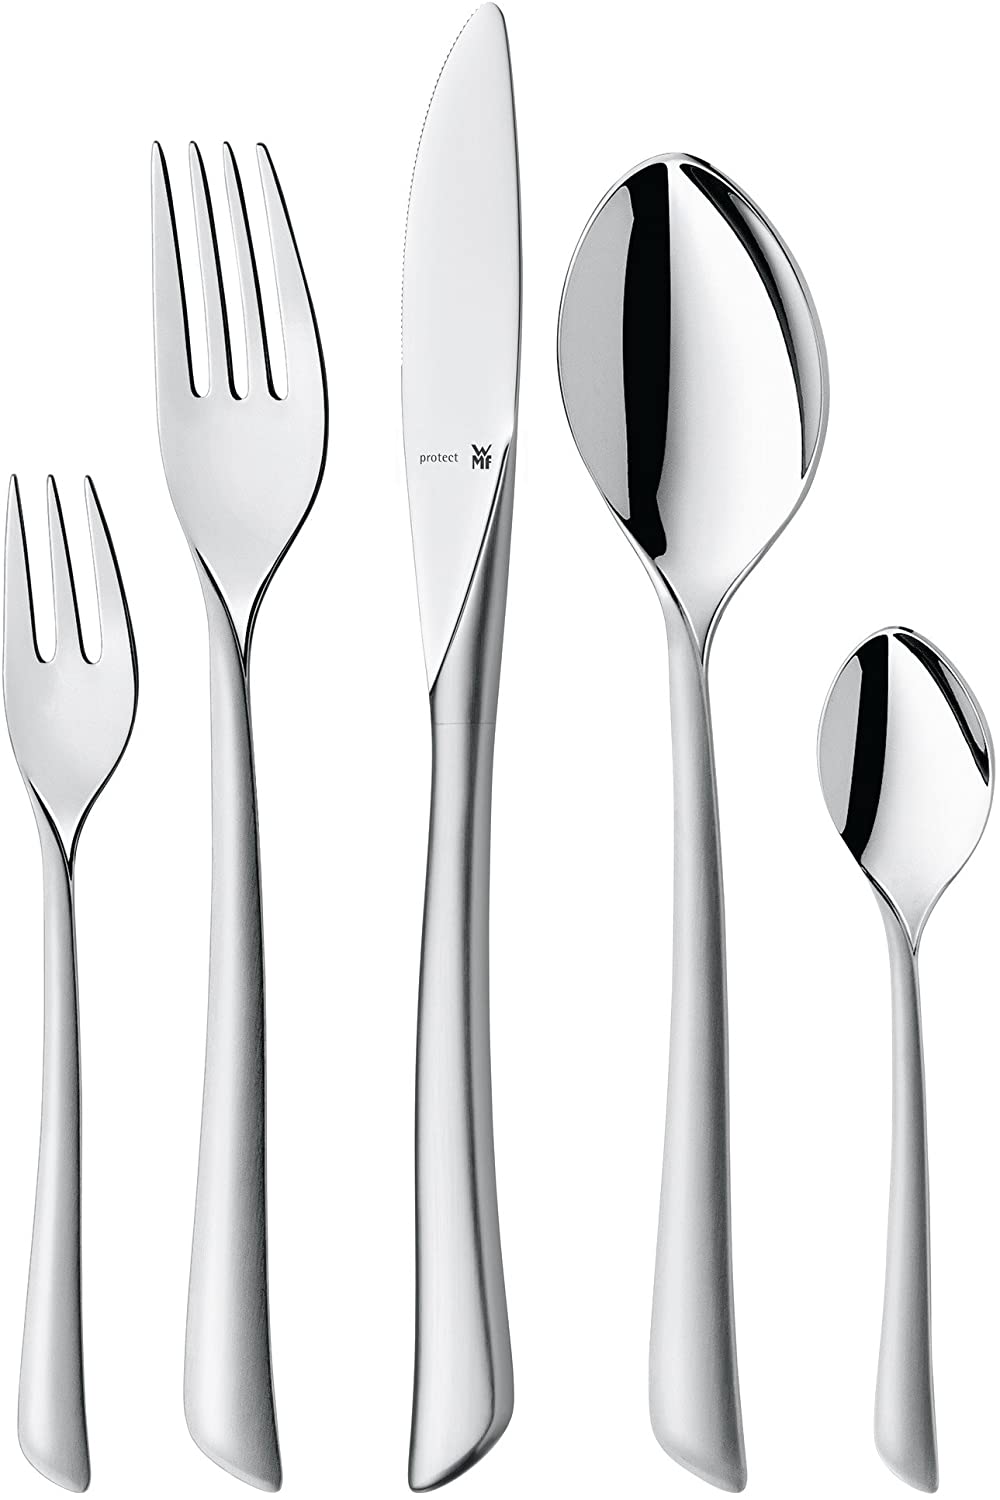 WMF Virginia Cutlery for Several People Art –